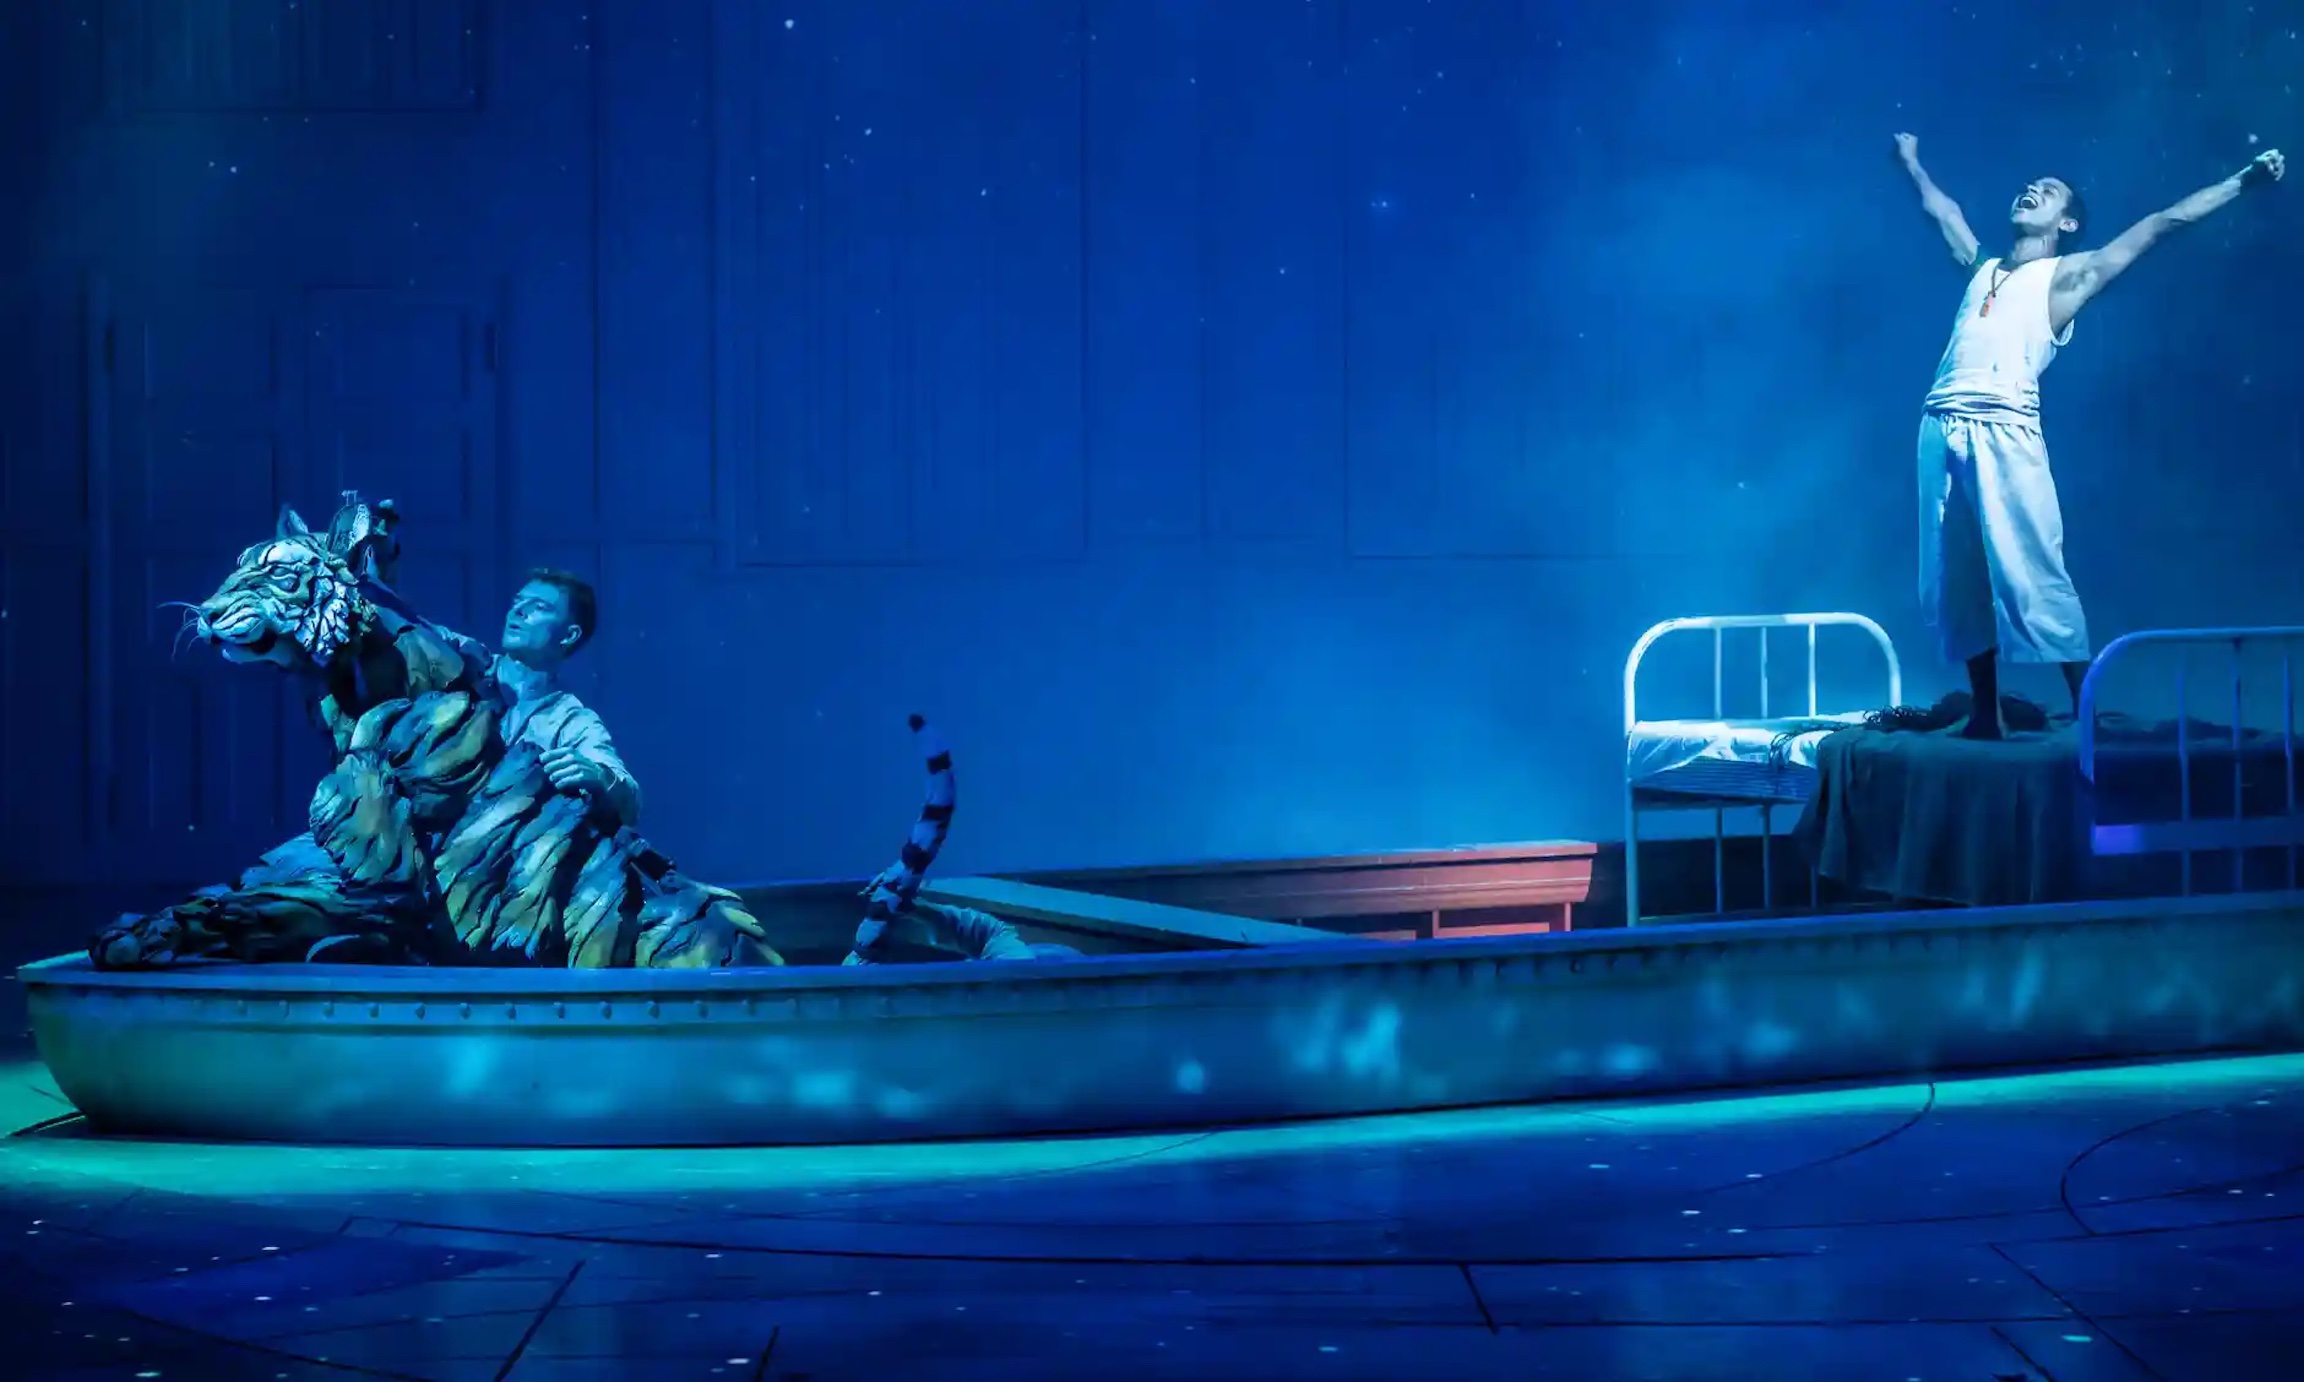 Life Of Pi photo by Johan Persson